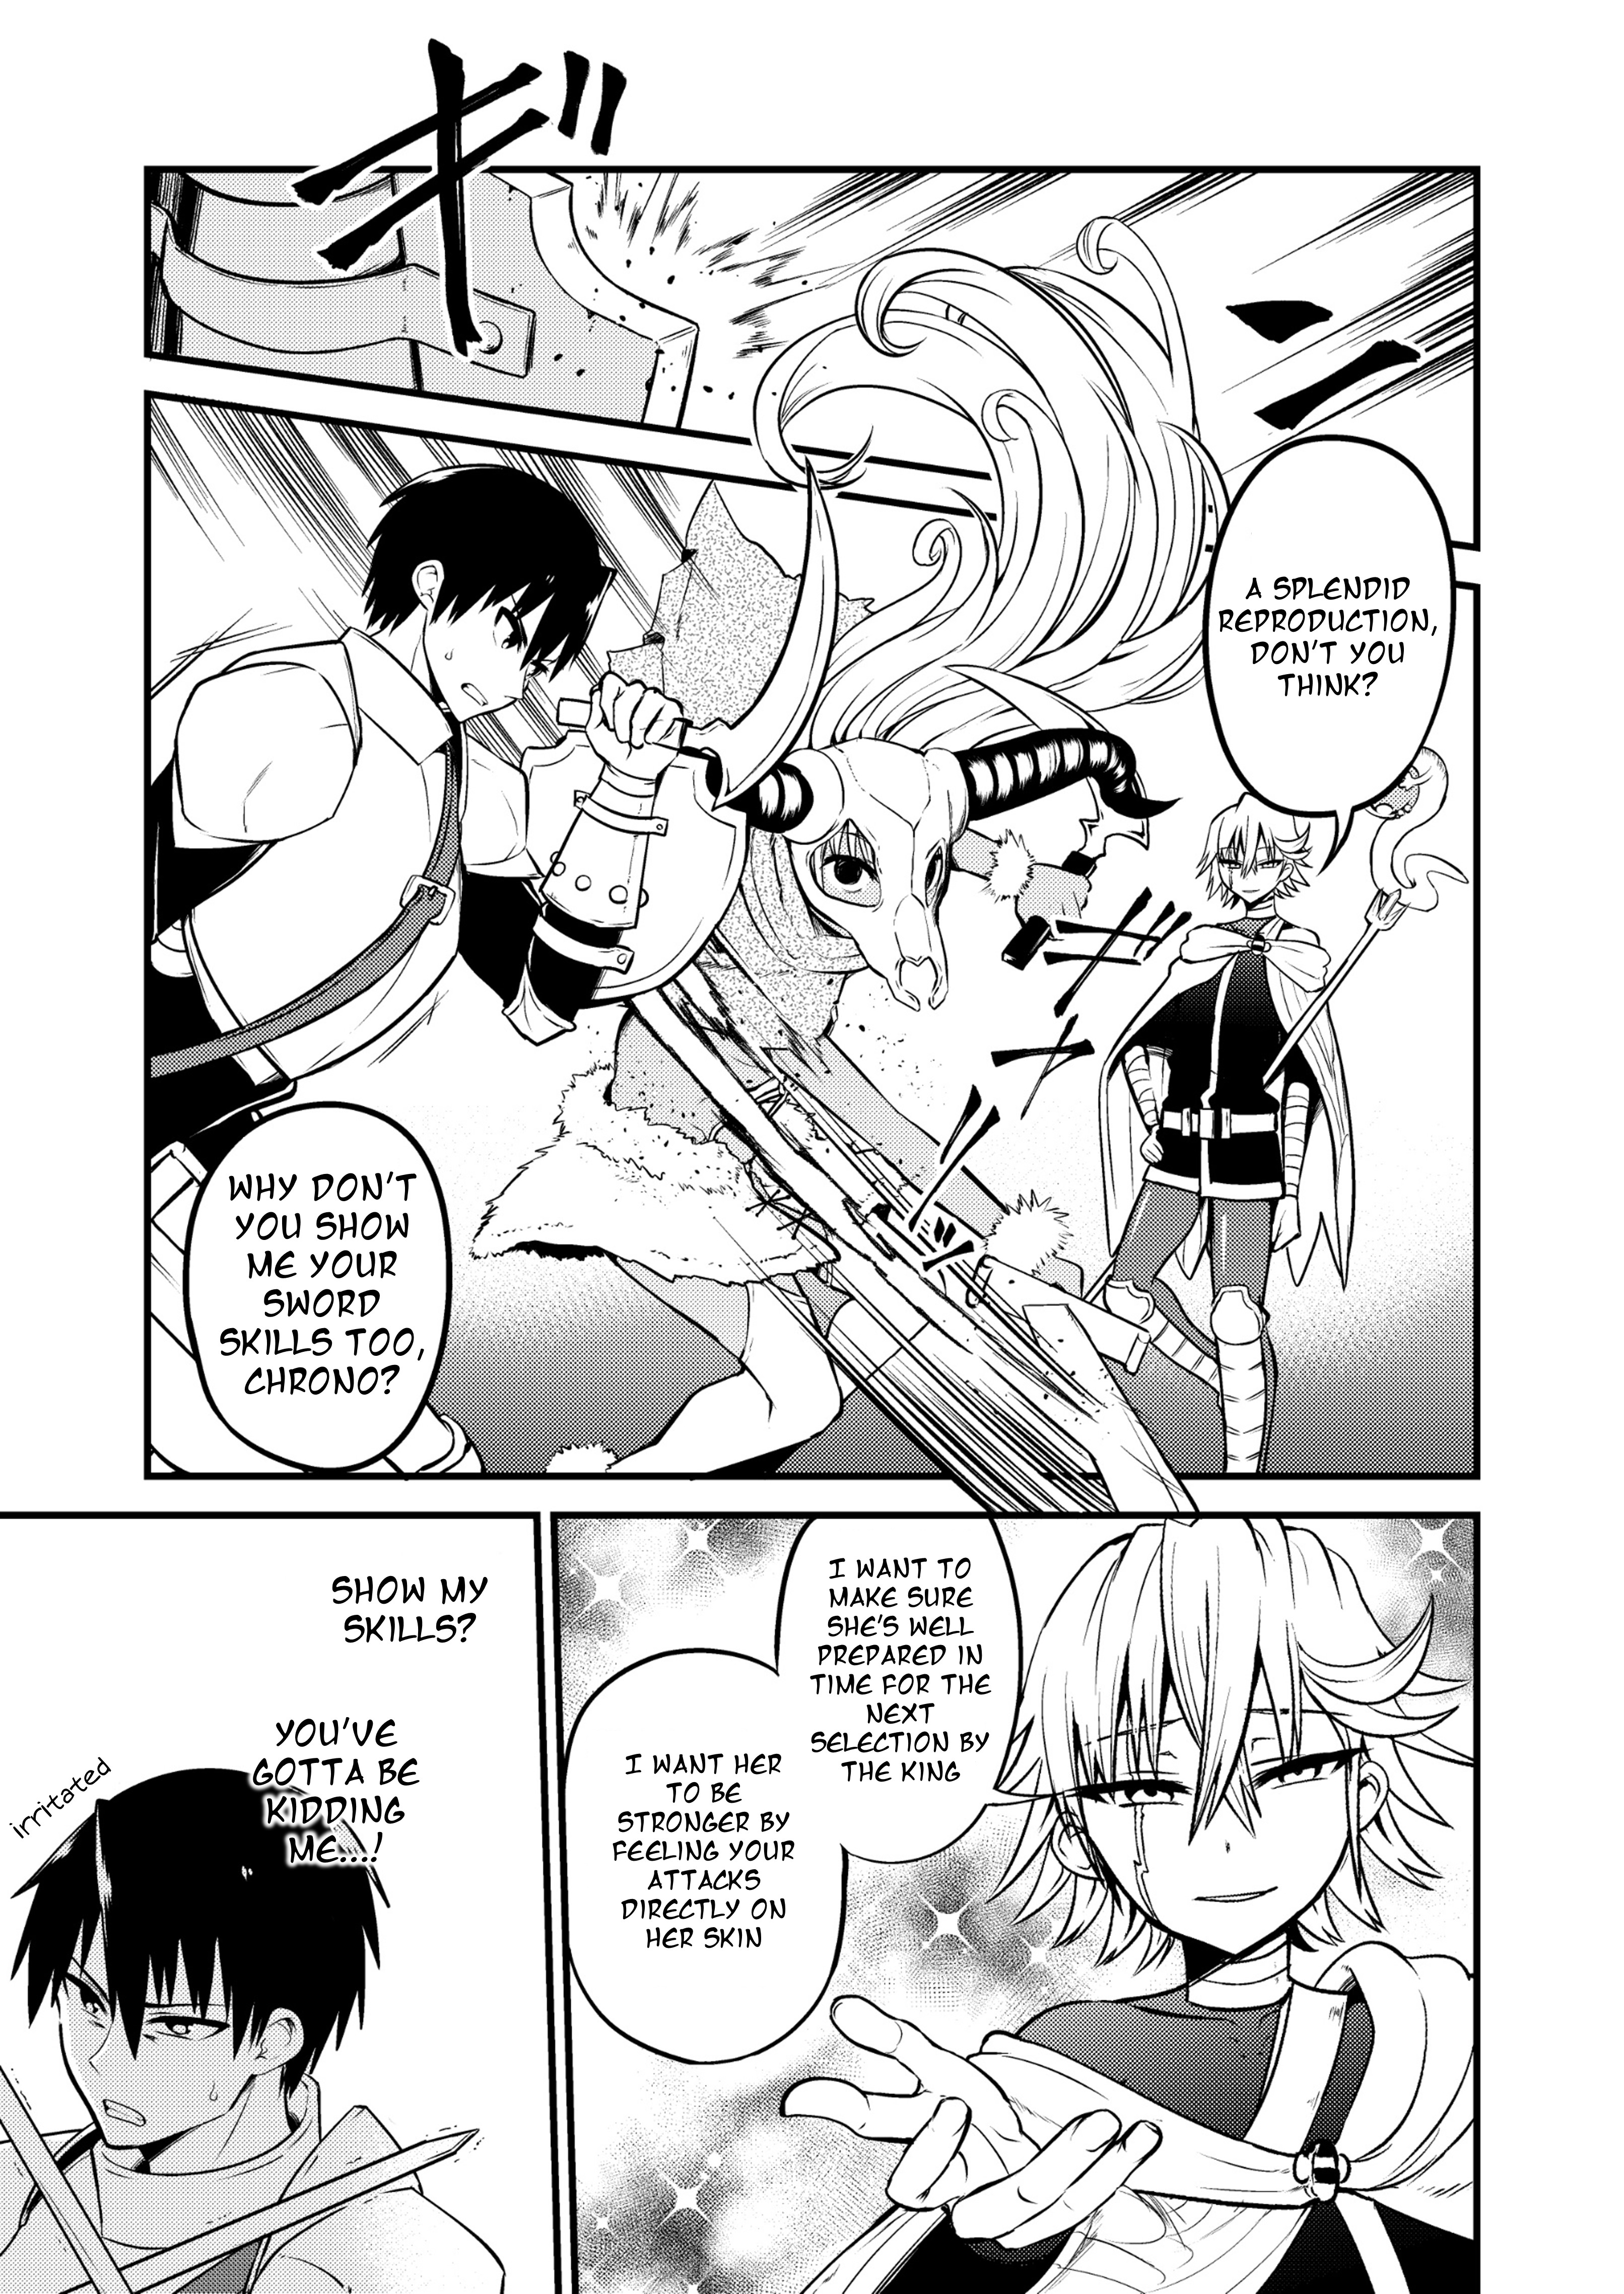 Shiro Madoushi Syrup-San Vol.1 Chapter 21: White Mage Syrup-San And Her Surprise - Picture 1